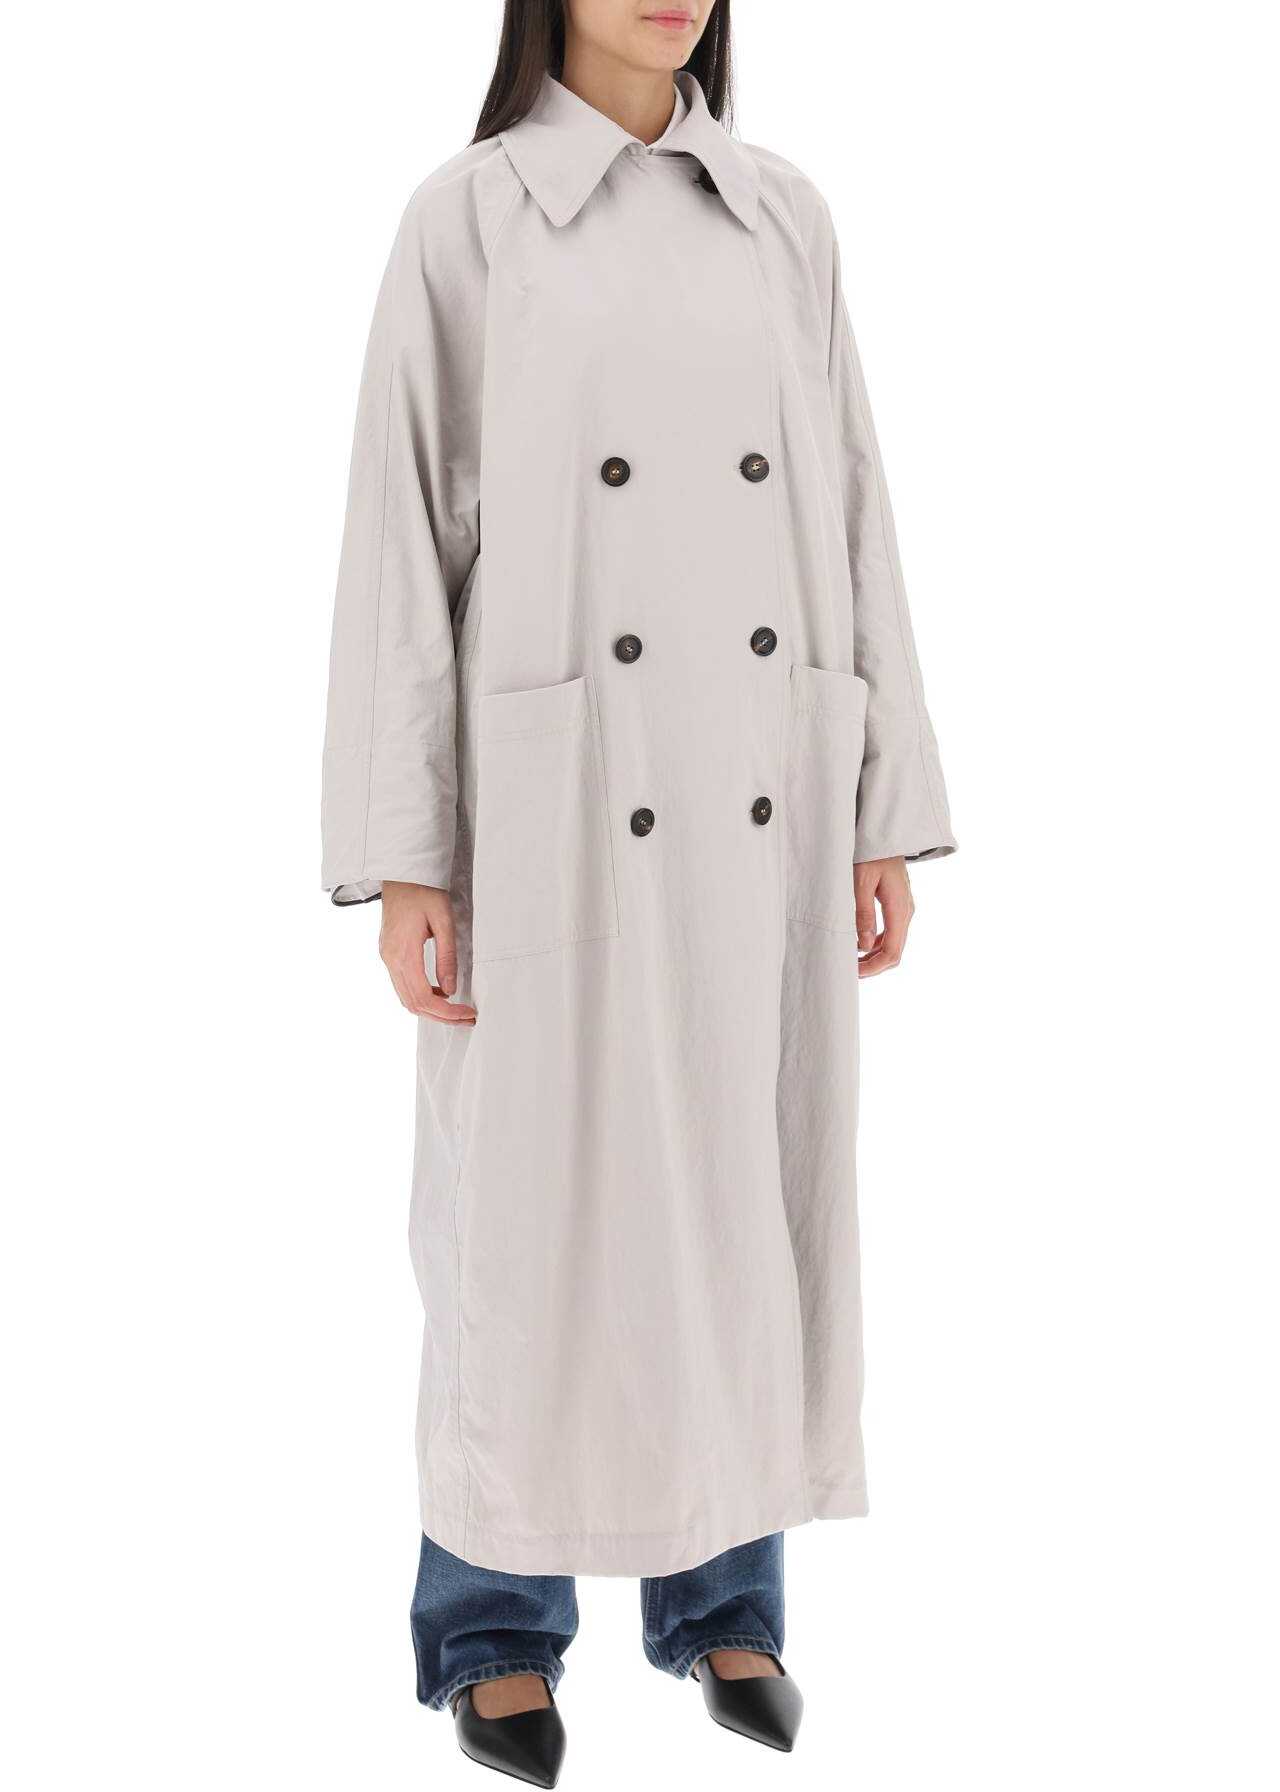 Brunello Cucinelli Double-Breasted Trench Coat With Shiny Cuff Details QUARZO